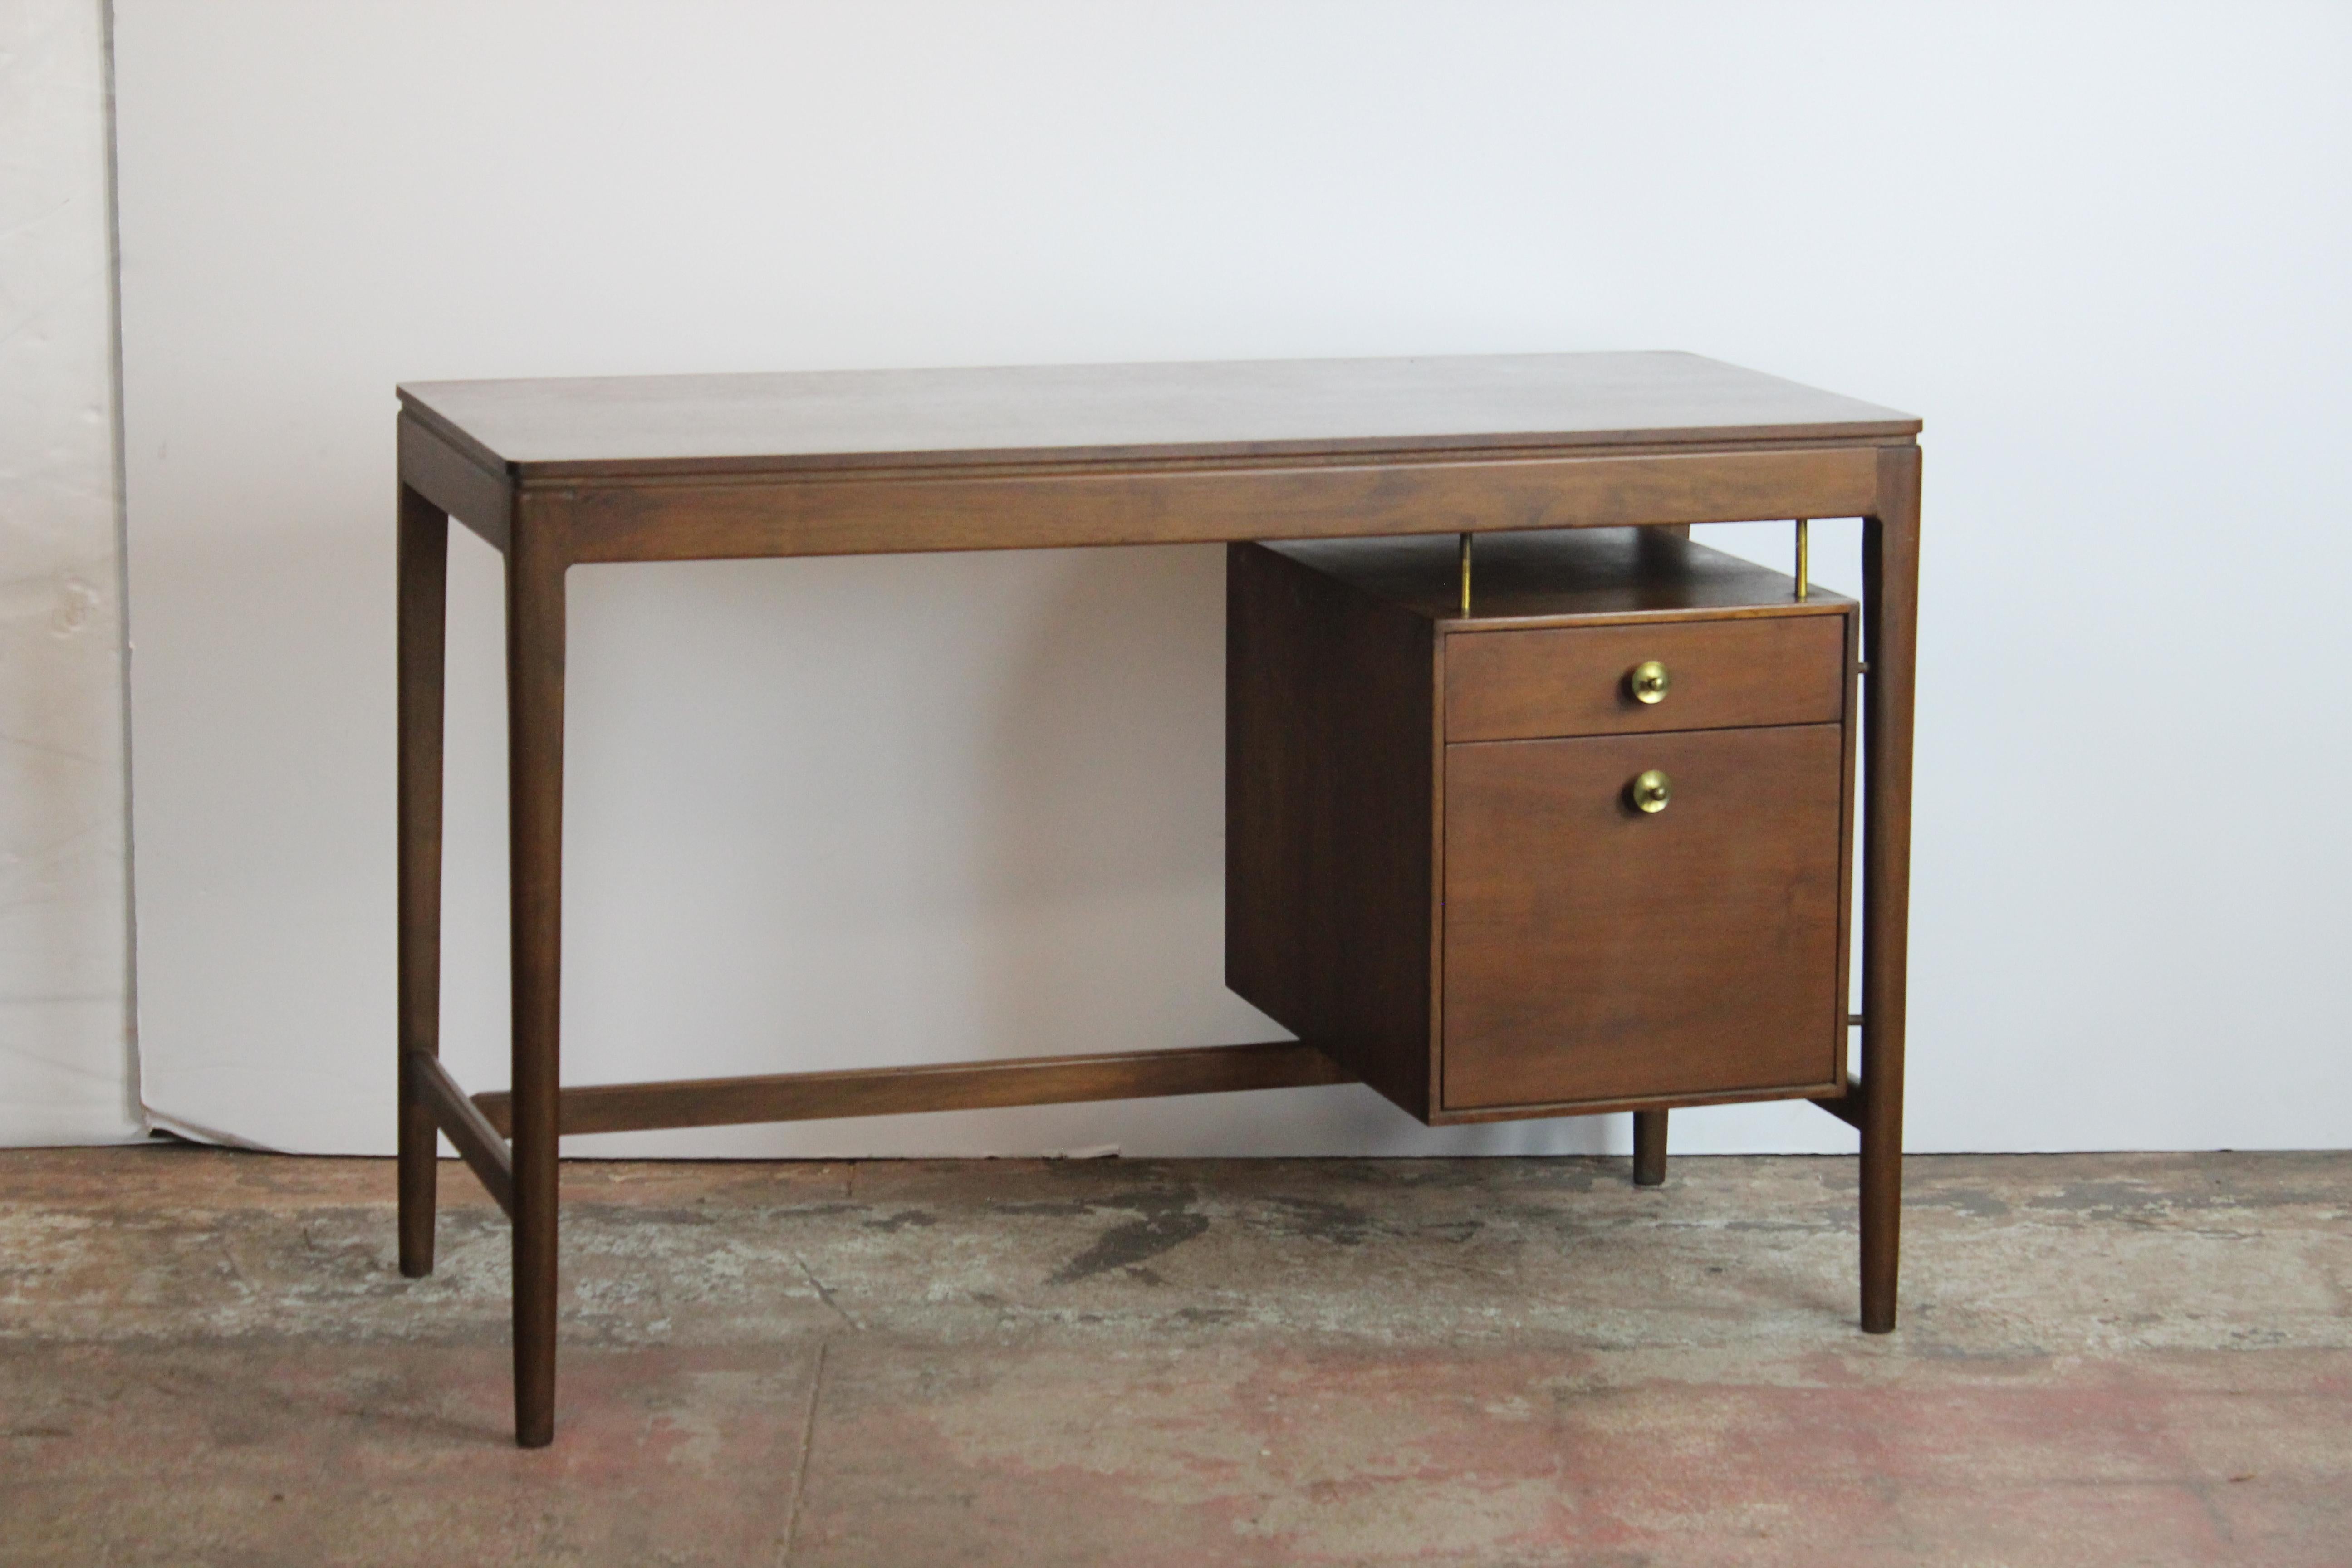 Midcentury desk by Drexel. The chair has cane seat and brass accent. Measures: Chair 21